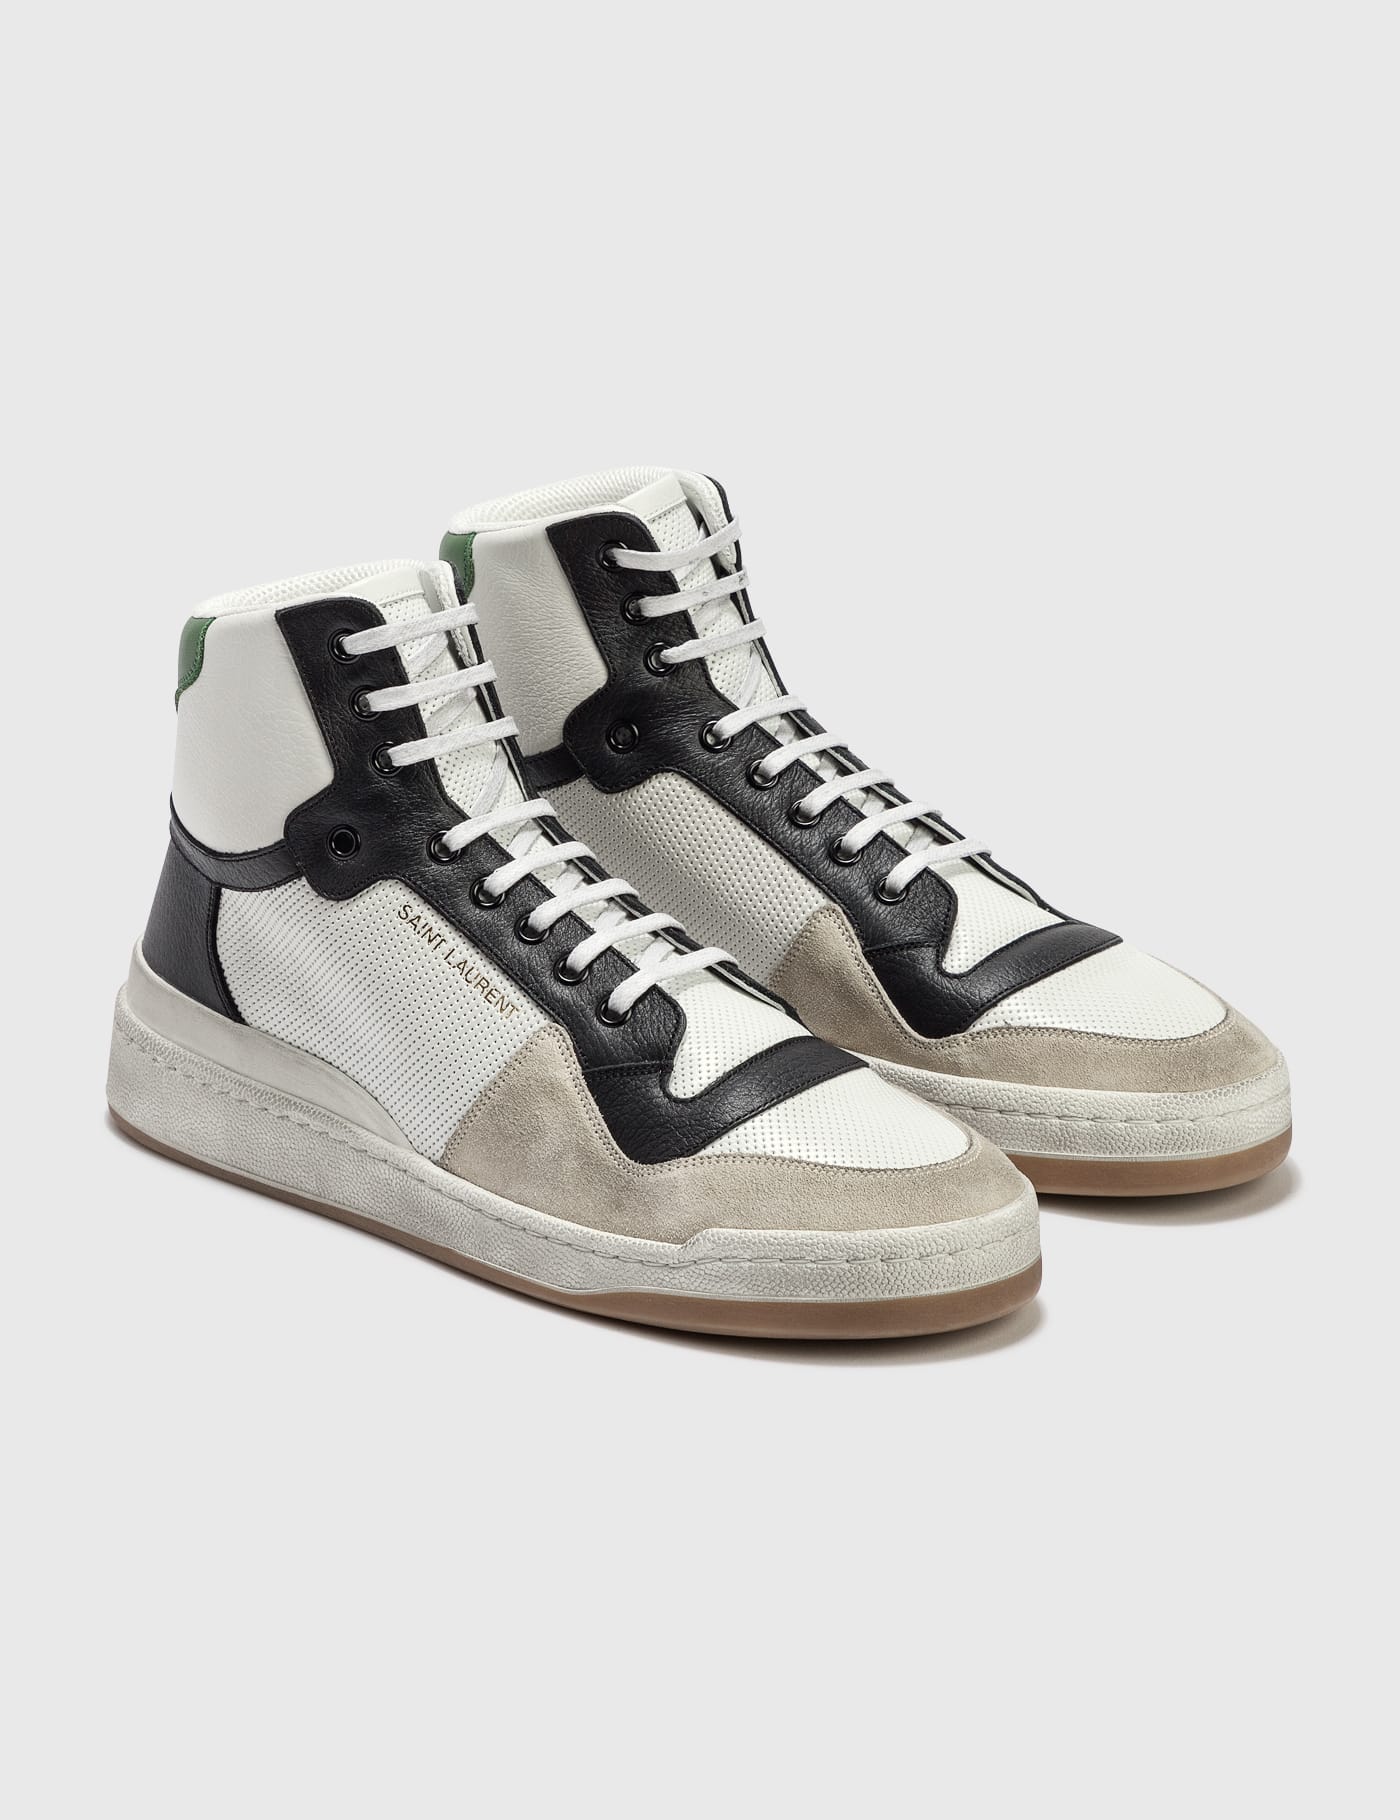 Saint Laurent - Sl24 High Top Sneaker | HBX - Globally Curated Fashion and  Lifestyle by Hypebeast